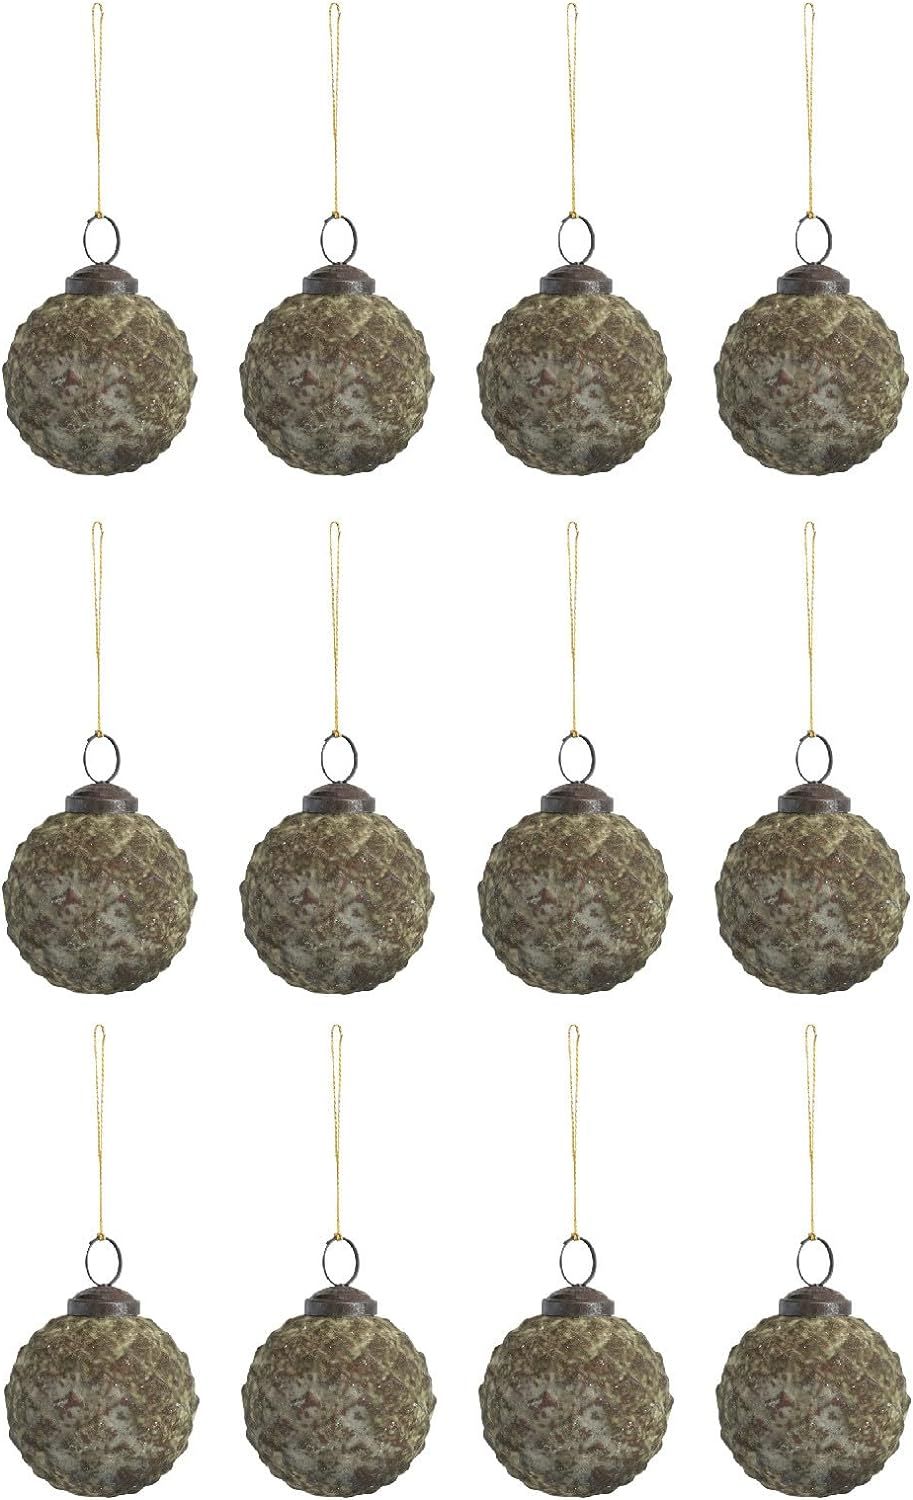 Creative Co-Op Round Embossed Glass Ball Ornament, Distressed Green Patina Finish, Set of 12 | Amazon (US)